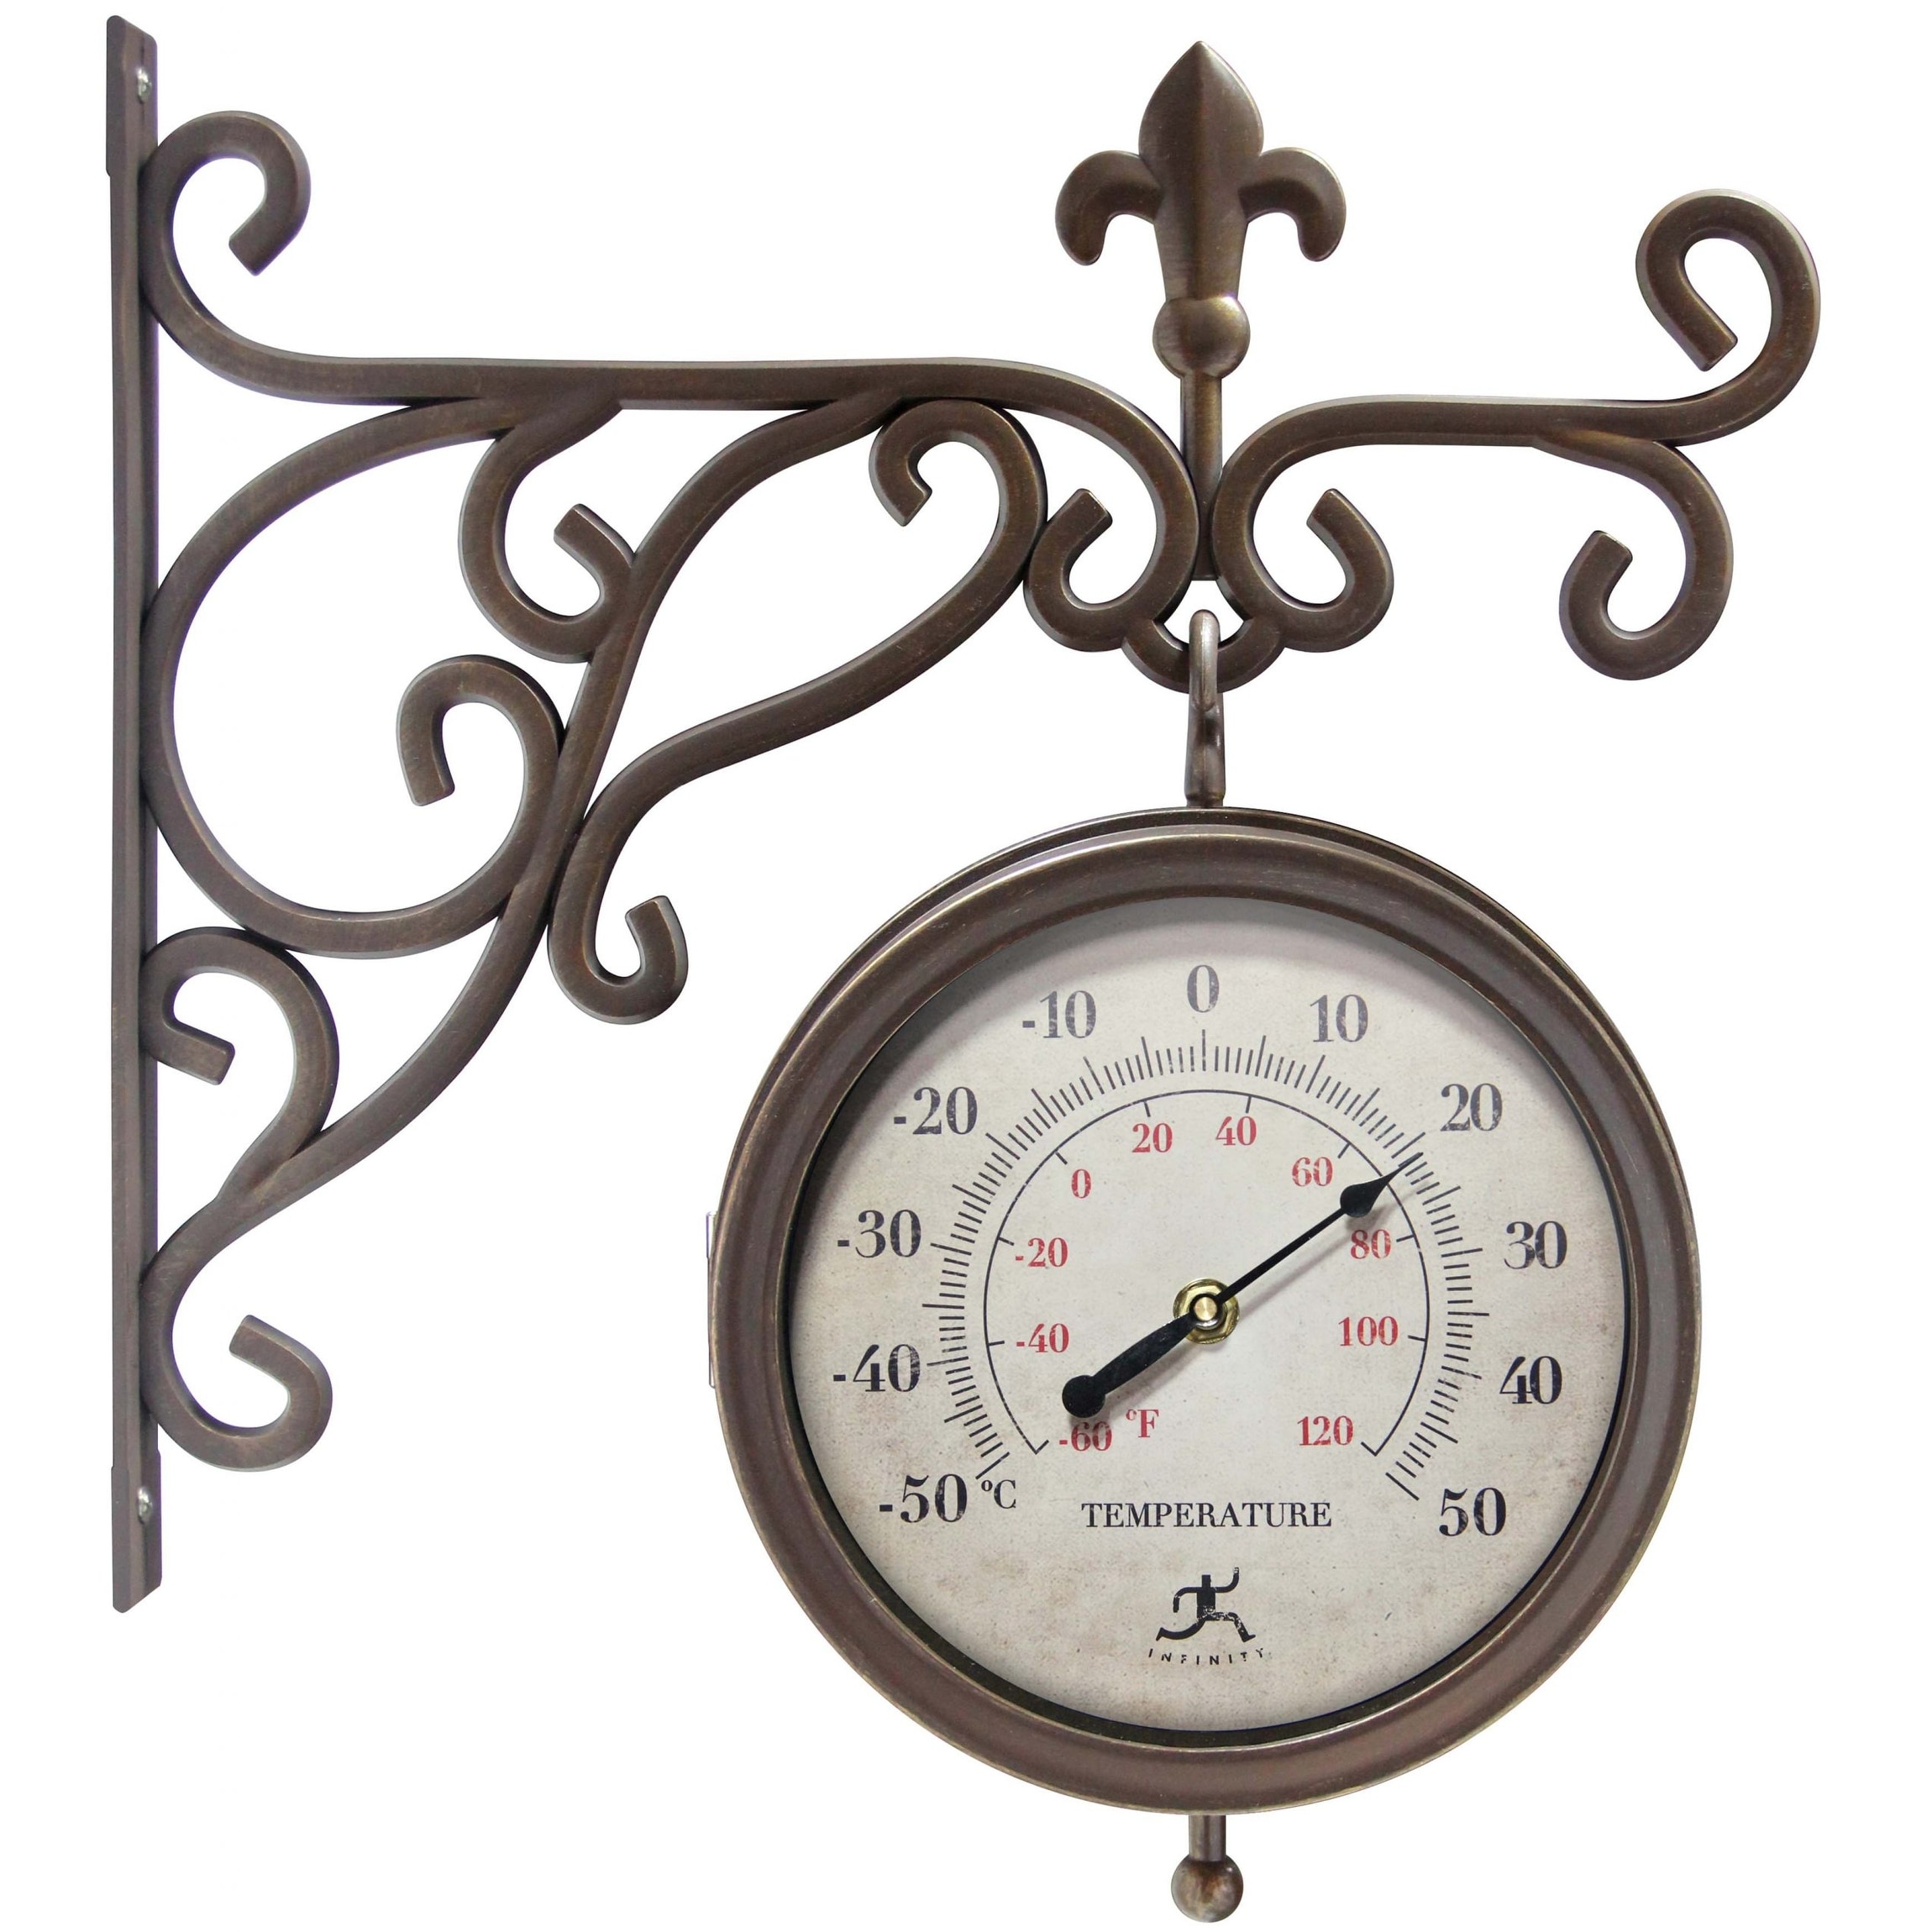 https://ak1.ostkcdn.com/images/products/is/images/direct/4c241e5ad381abcca83c38d5805742230120bda0/Beauregard-Double-Sided-Clock-and-Thermometer-Combo-Outdoor-Clock.jpg